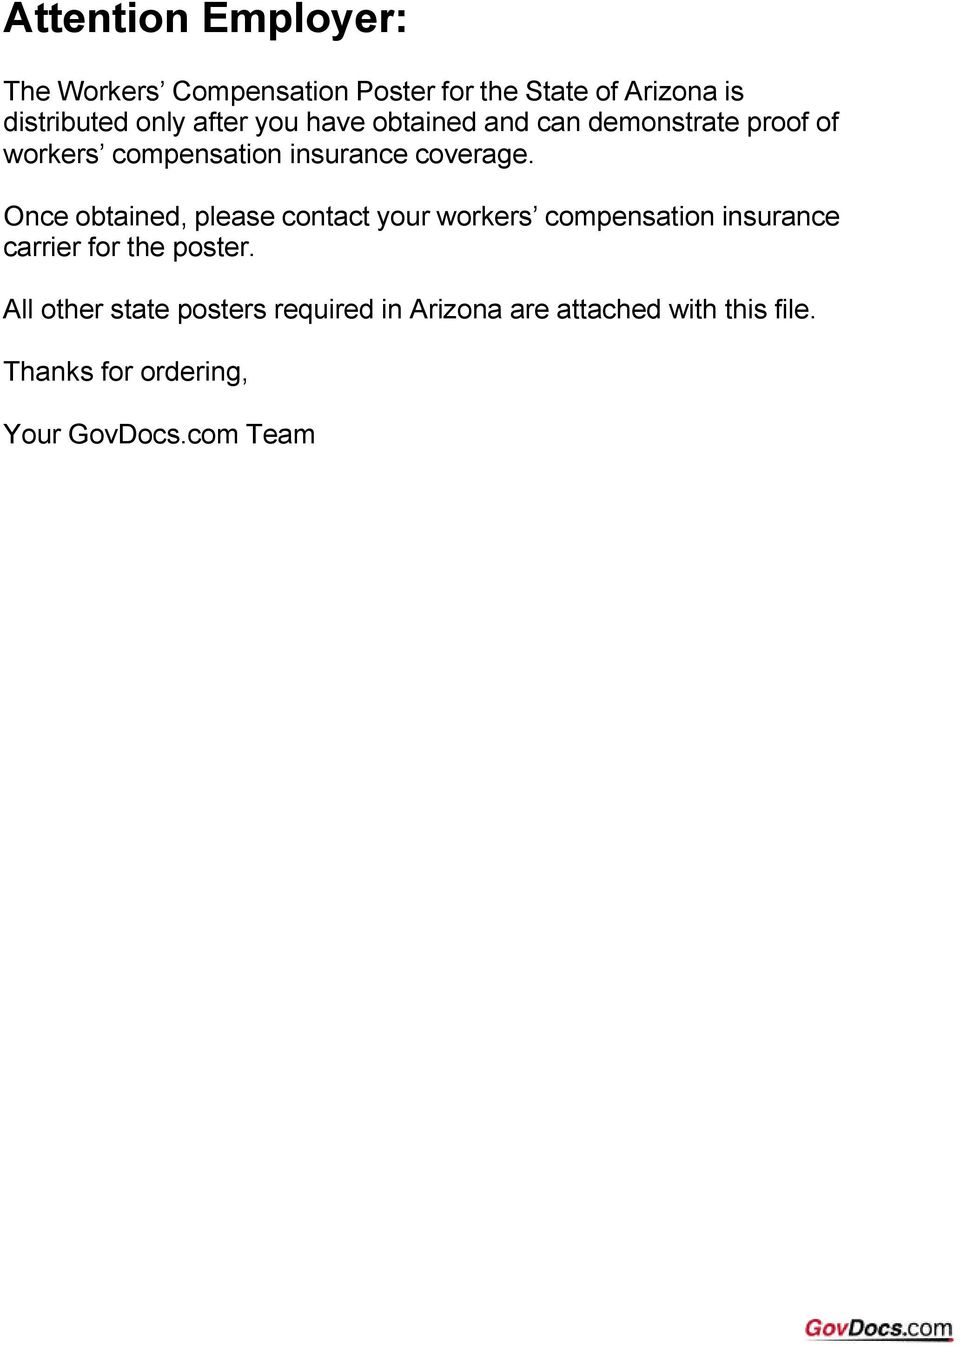 Once obtained, please contact your workers compensation insurance carrier for the poster.